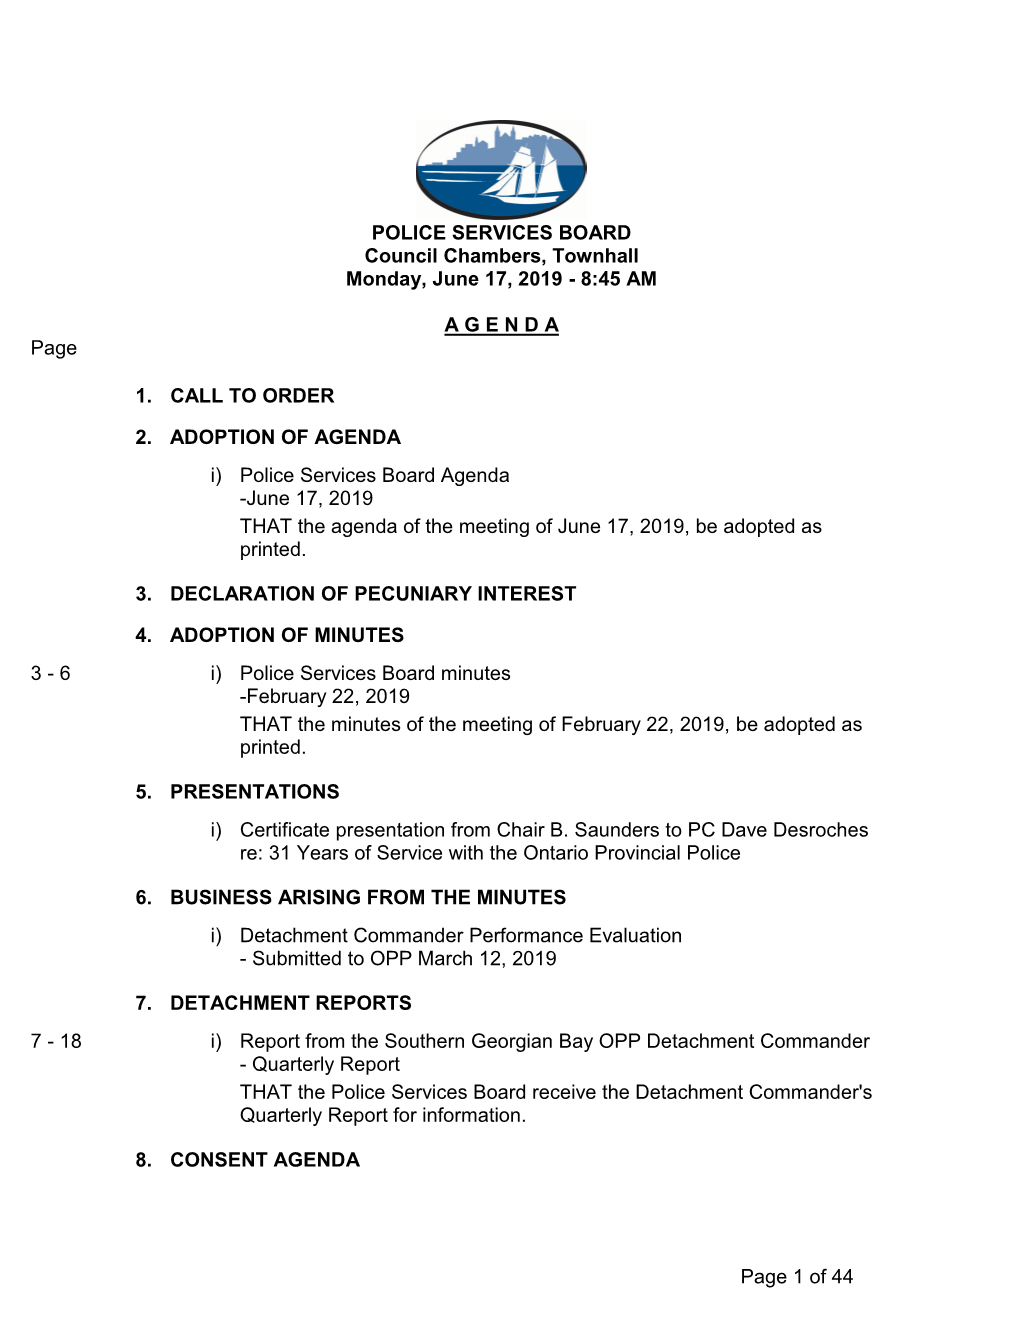 POLICE SERVICES BOARD Council Chambers, Townhall Monday, June 17, 2019 - 8:45 AM